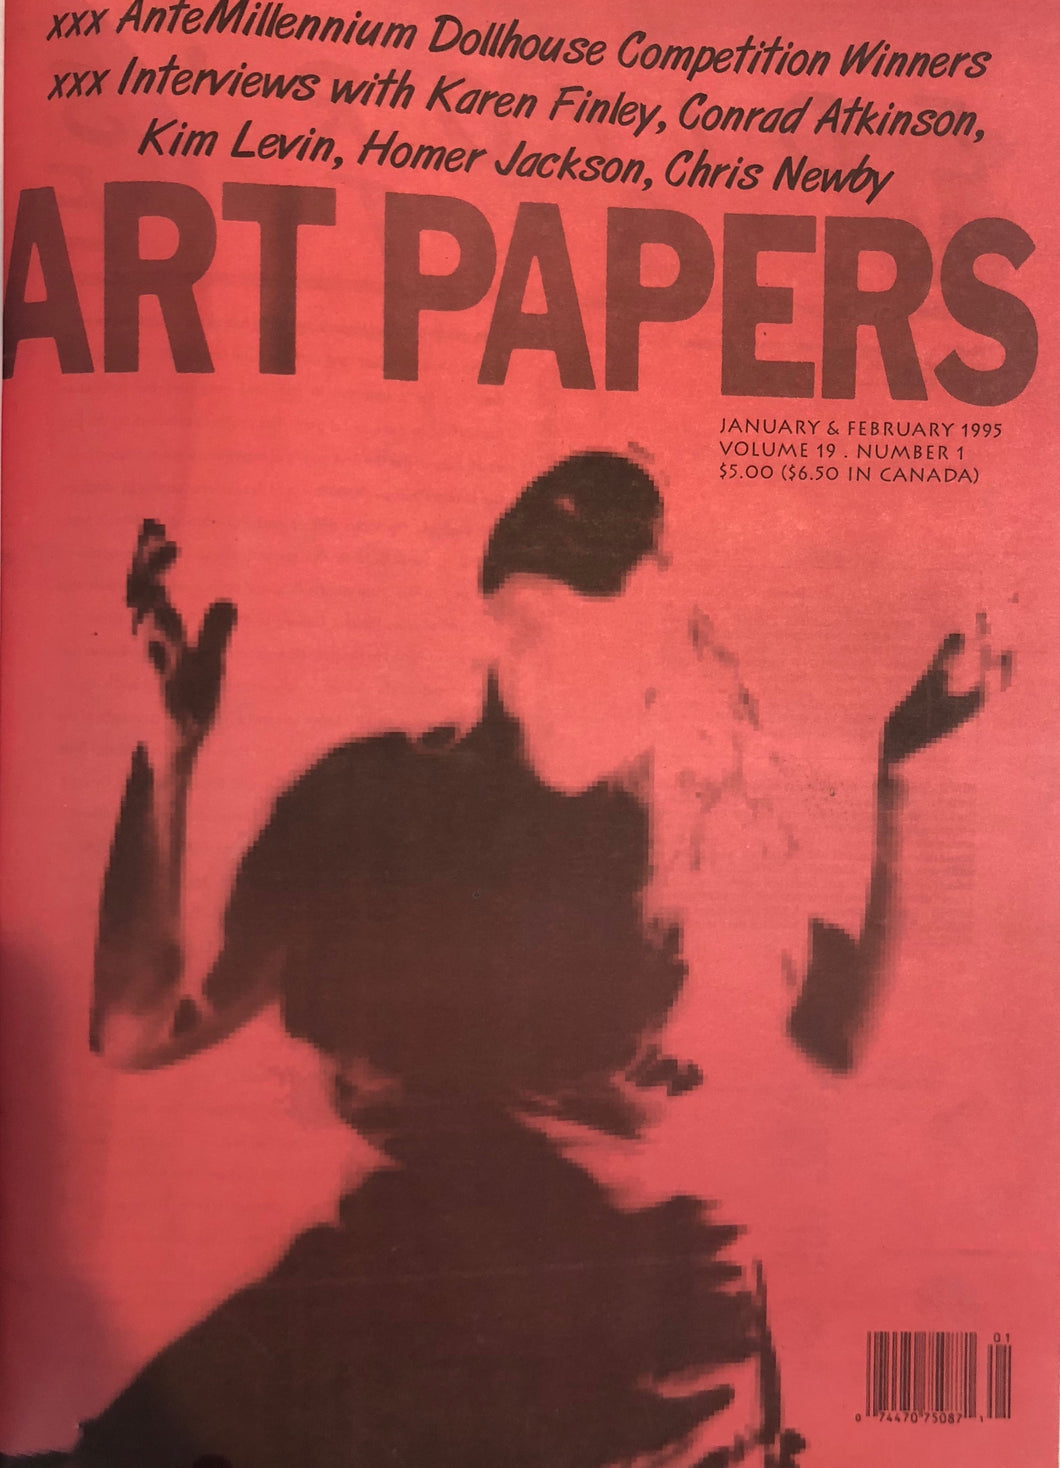 ART PAPERS 19.01 - Jan/Feb 1995 - SOLD OUT